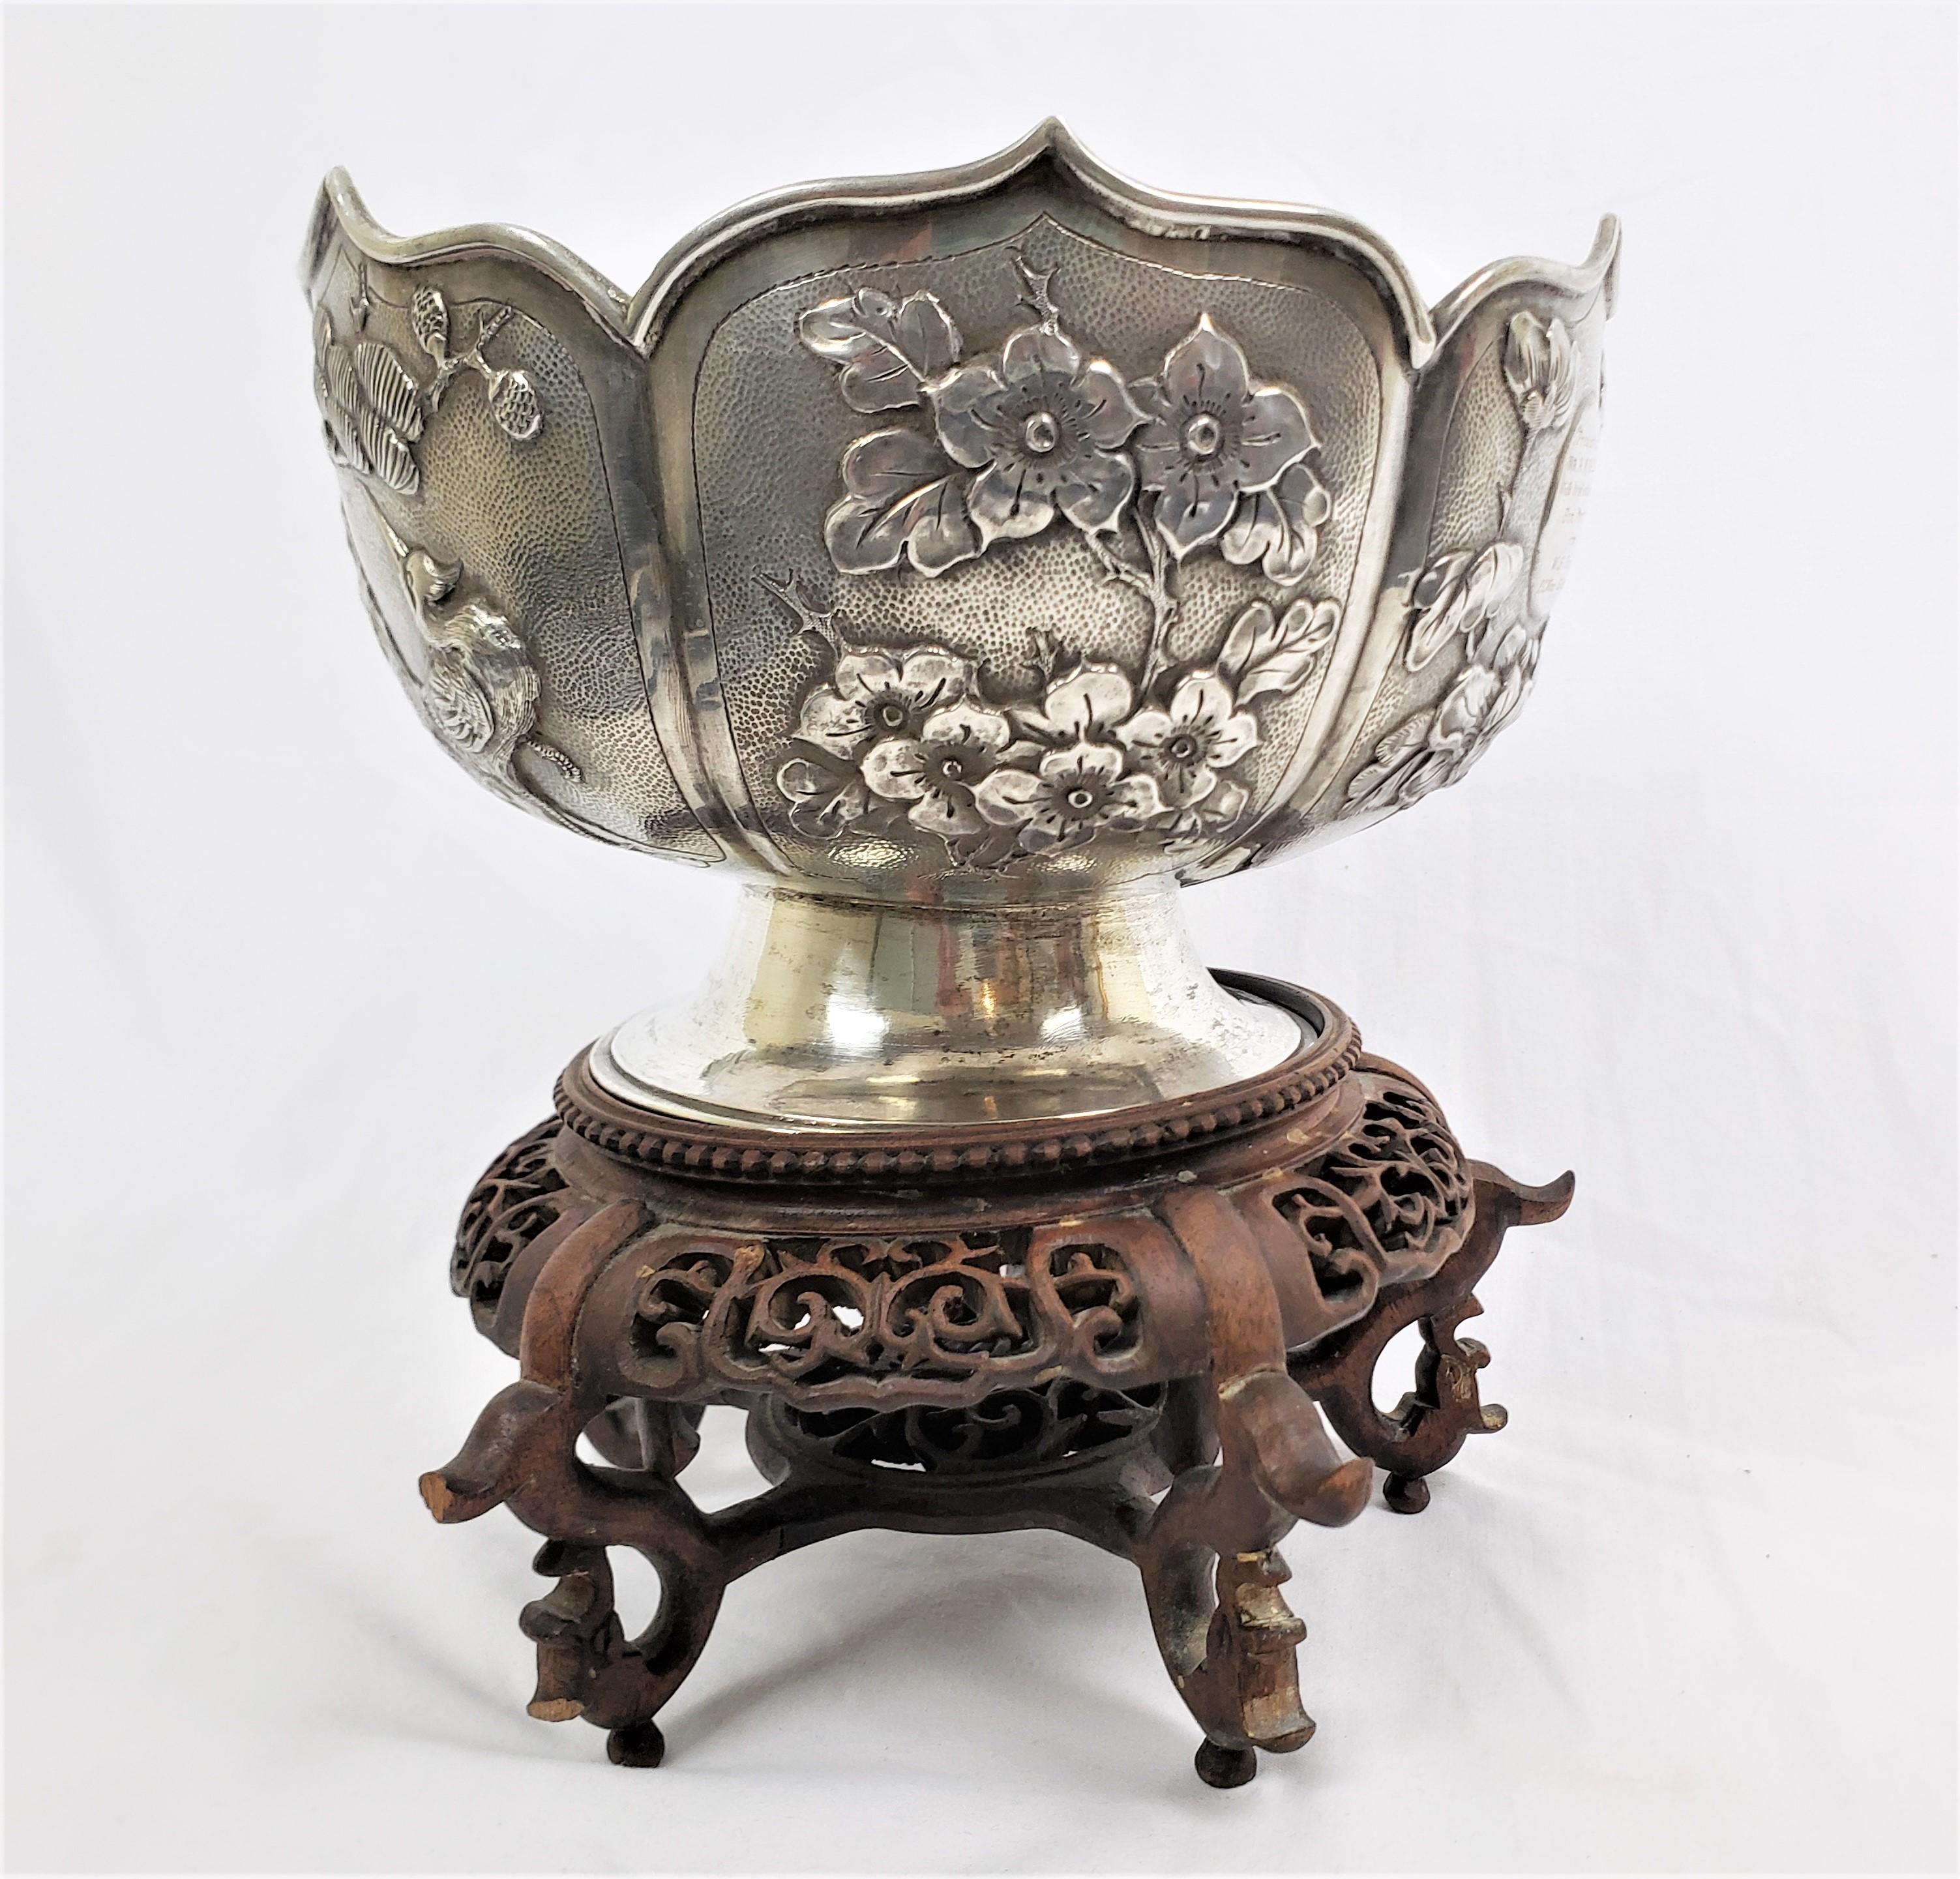 20th Century Zee Sung Signed Chinese Export Antique Chased Silver Presentation Bowl & Stand For Sale